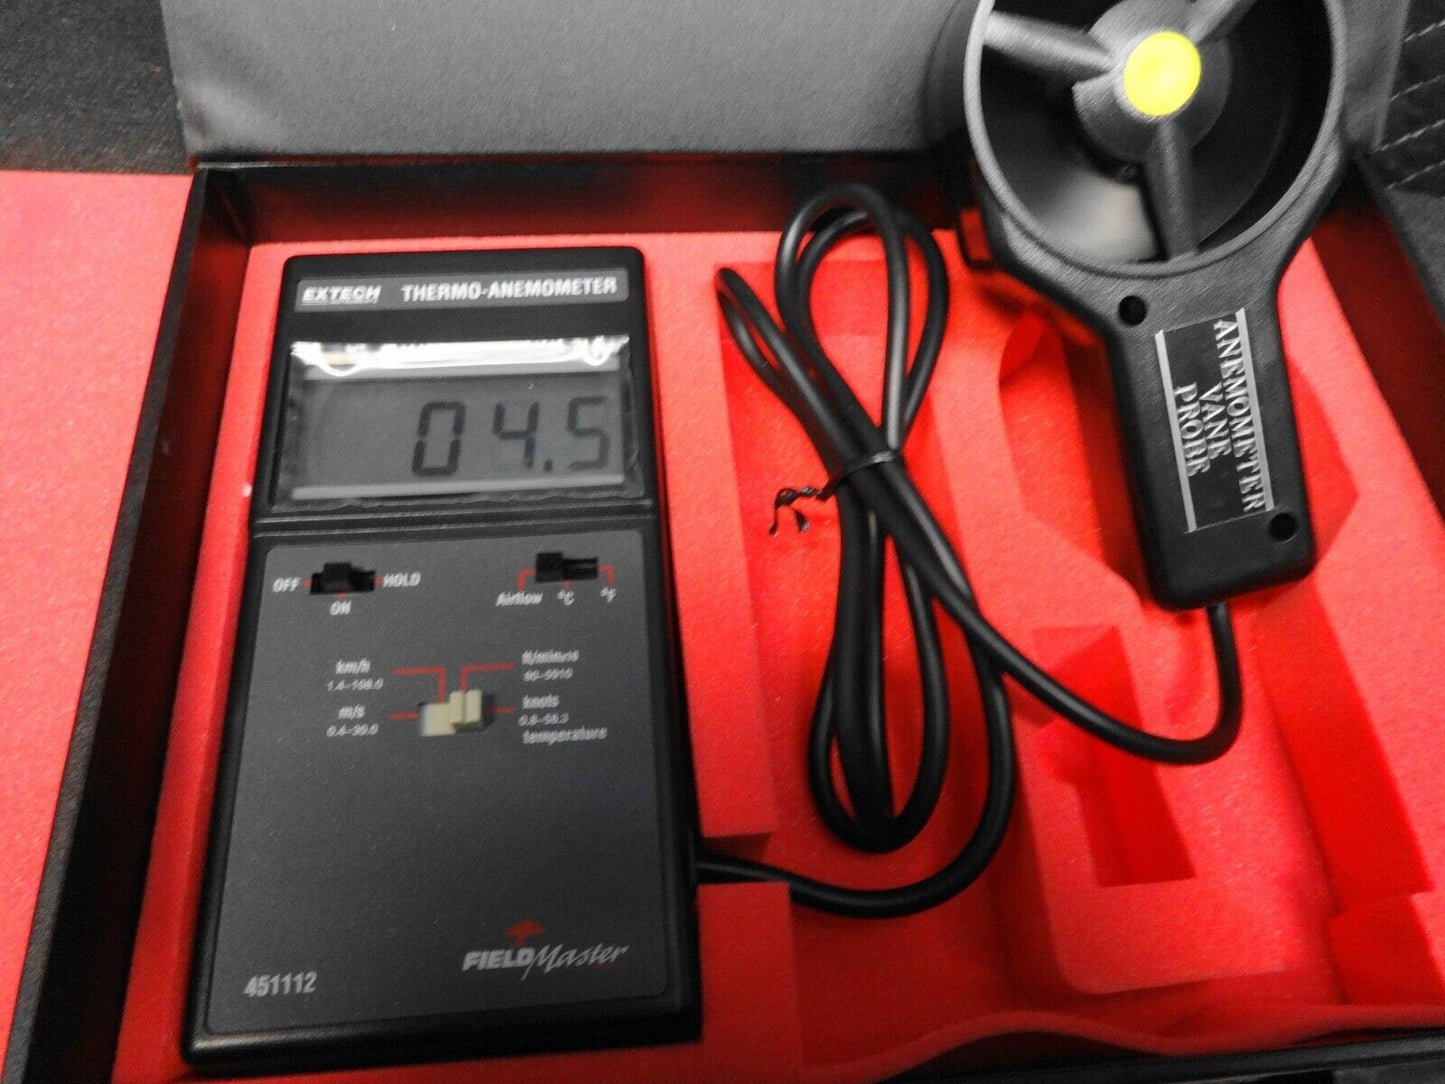 Extech Instruments Thermo-Anemometer Field Master with Probe 451112